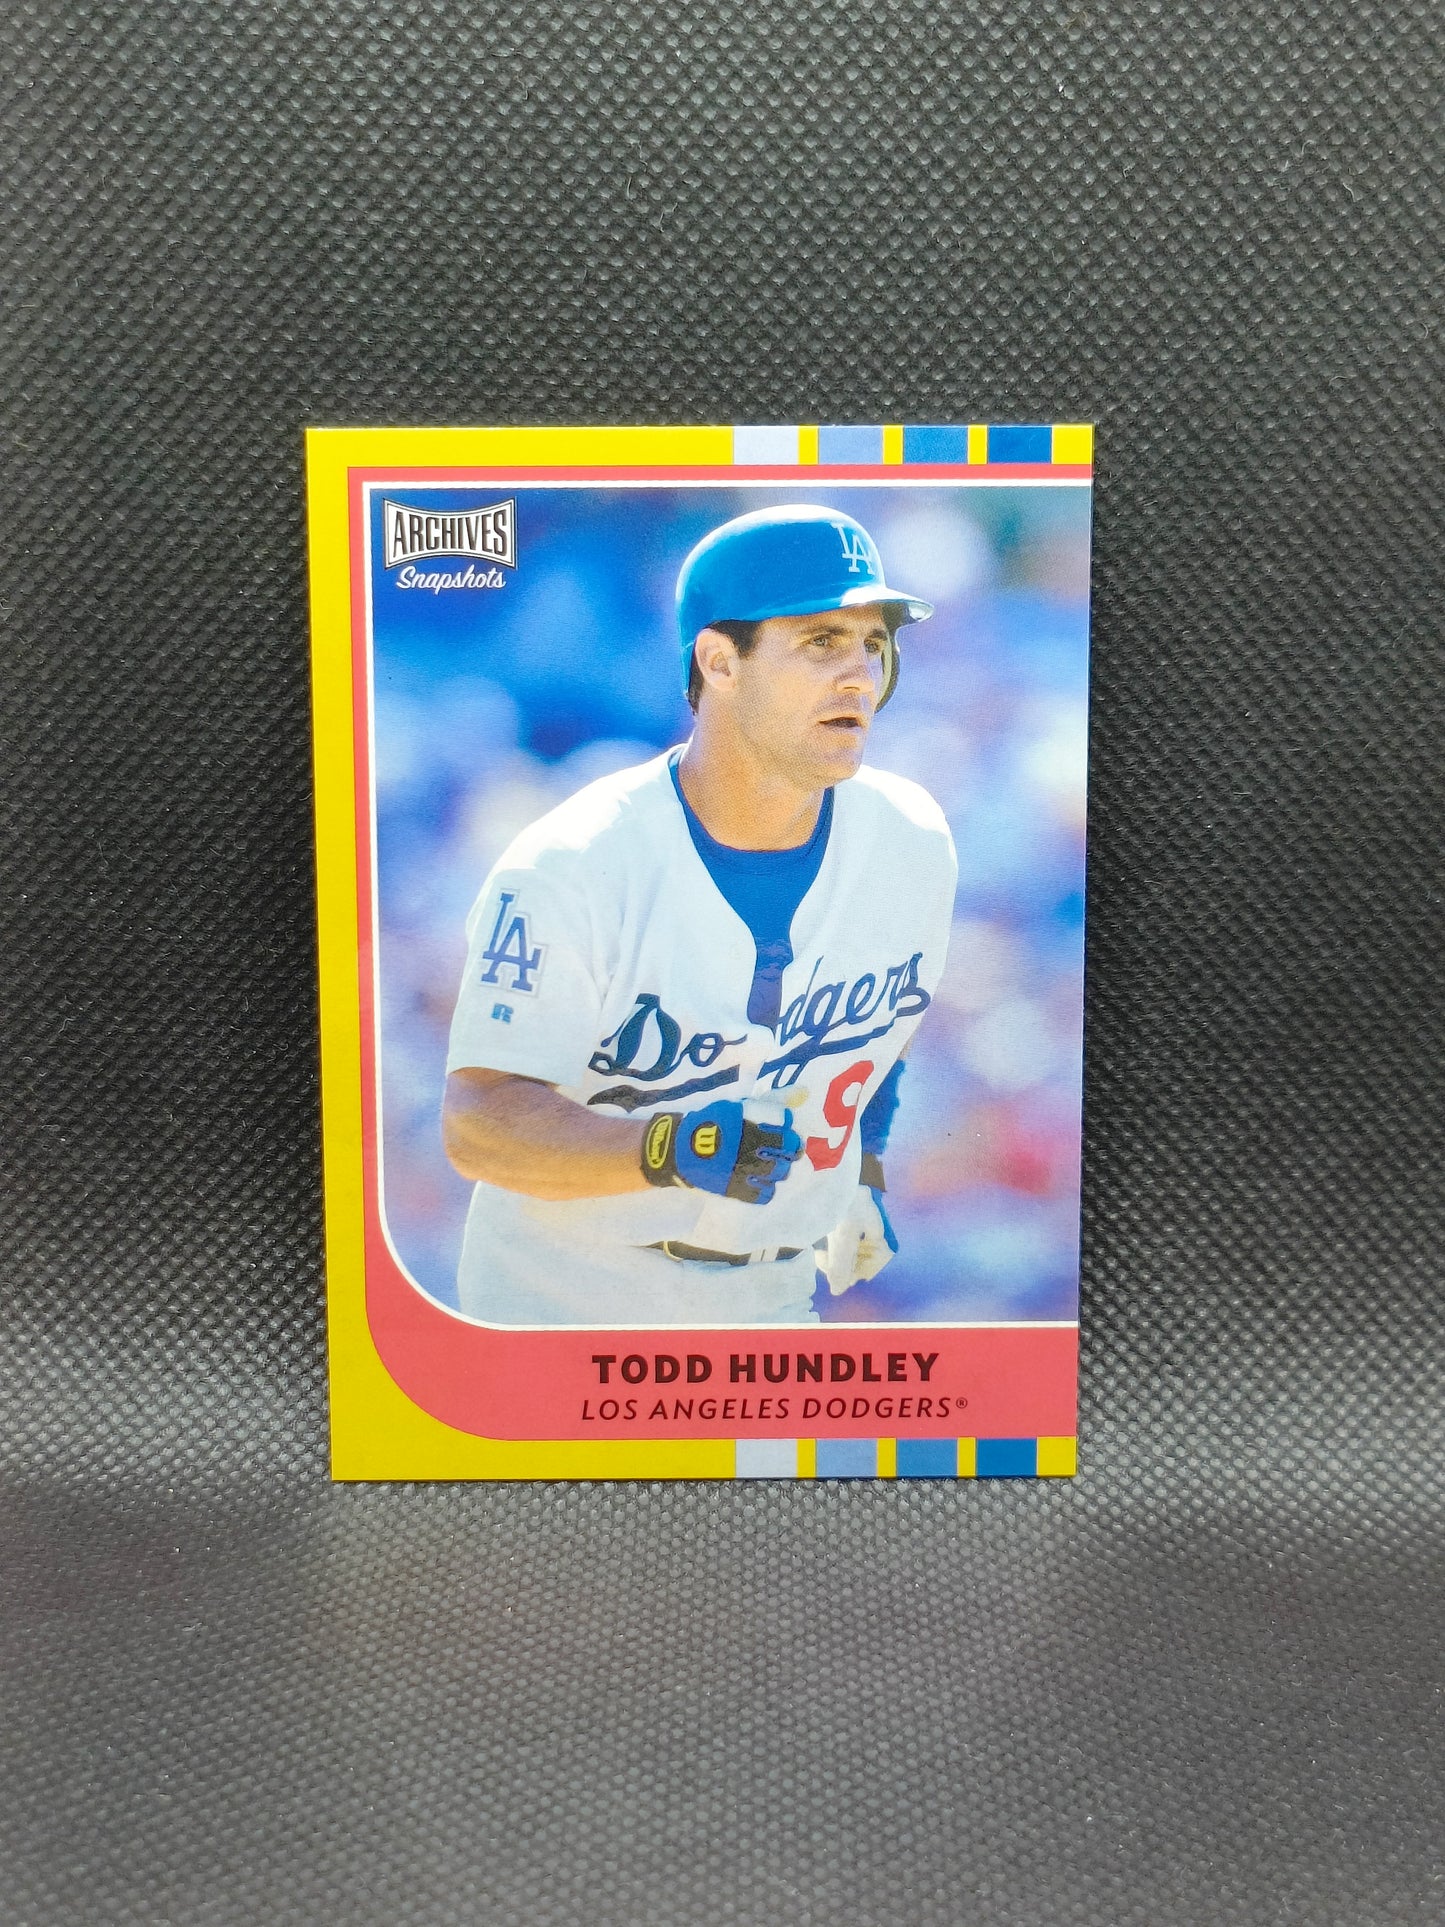 Todd Hundley - 2021 Topps Archives Snapshots Gold /10 - LA Dodgers